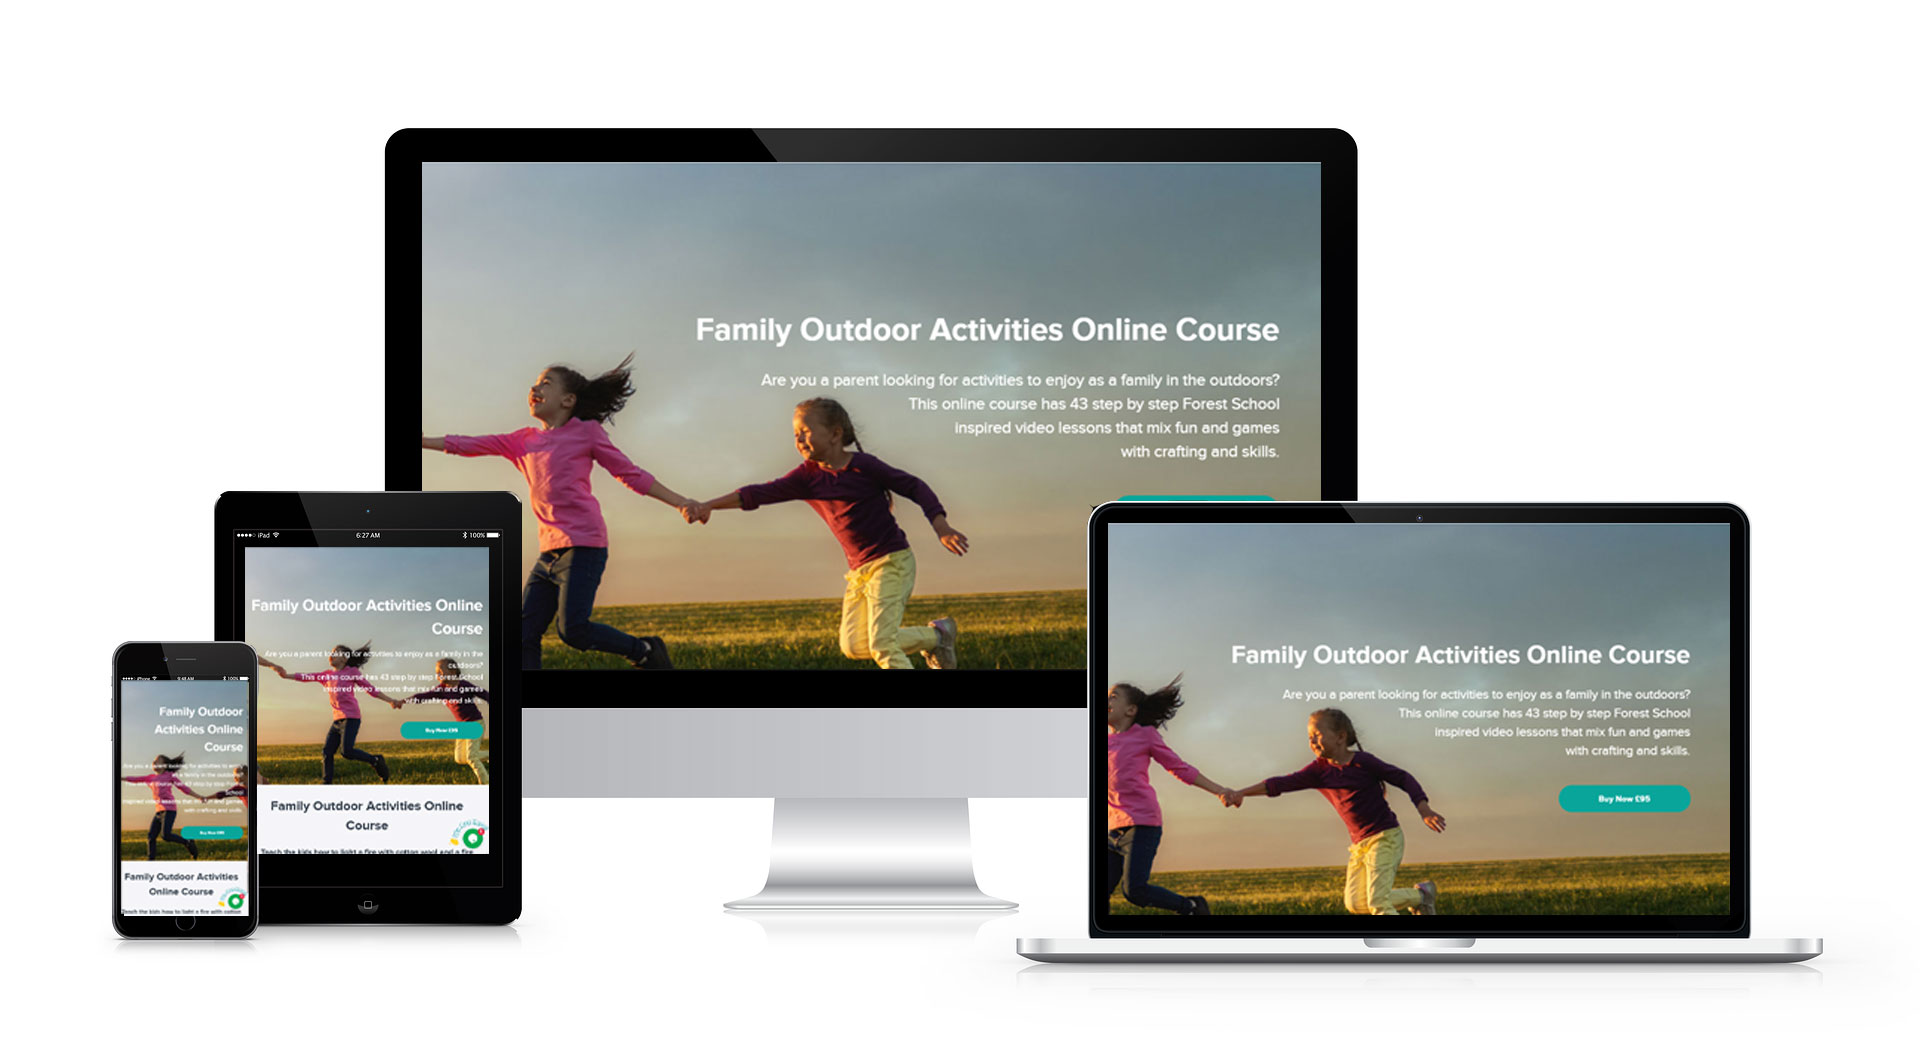 The Family Outdoor Activities Course